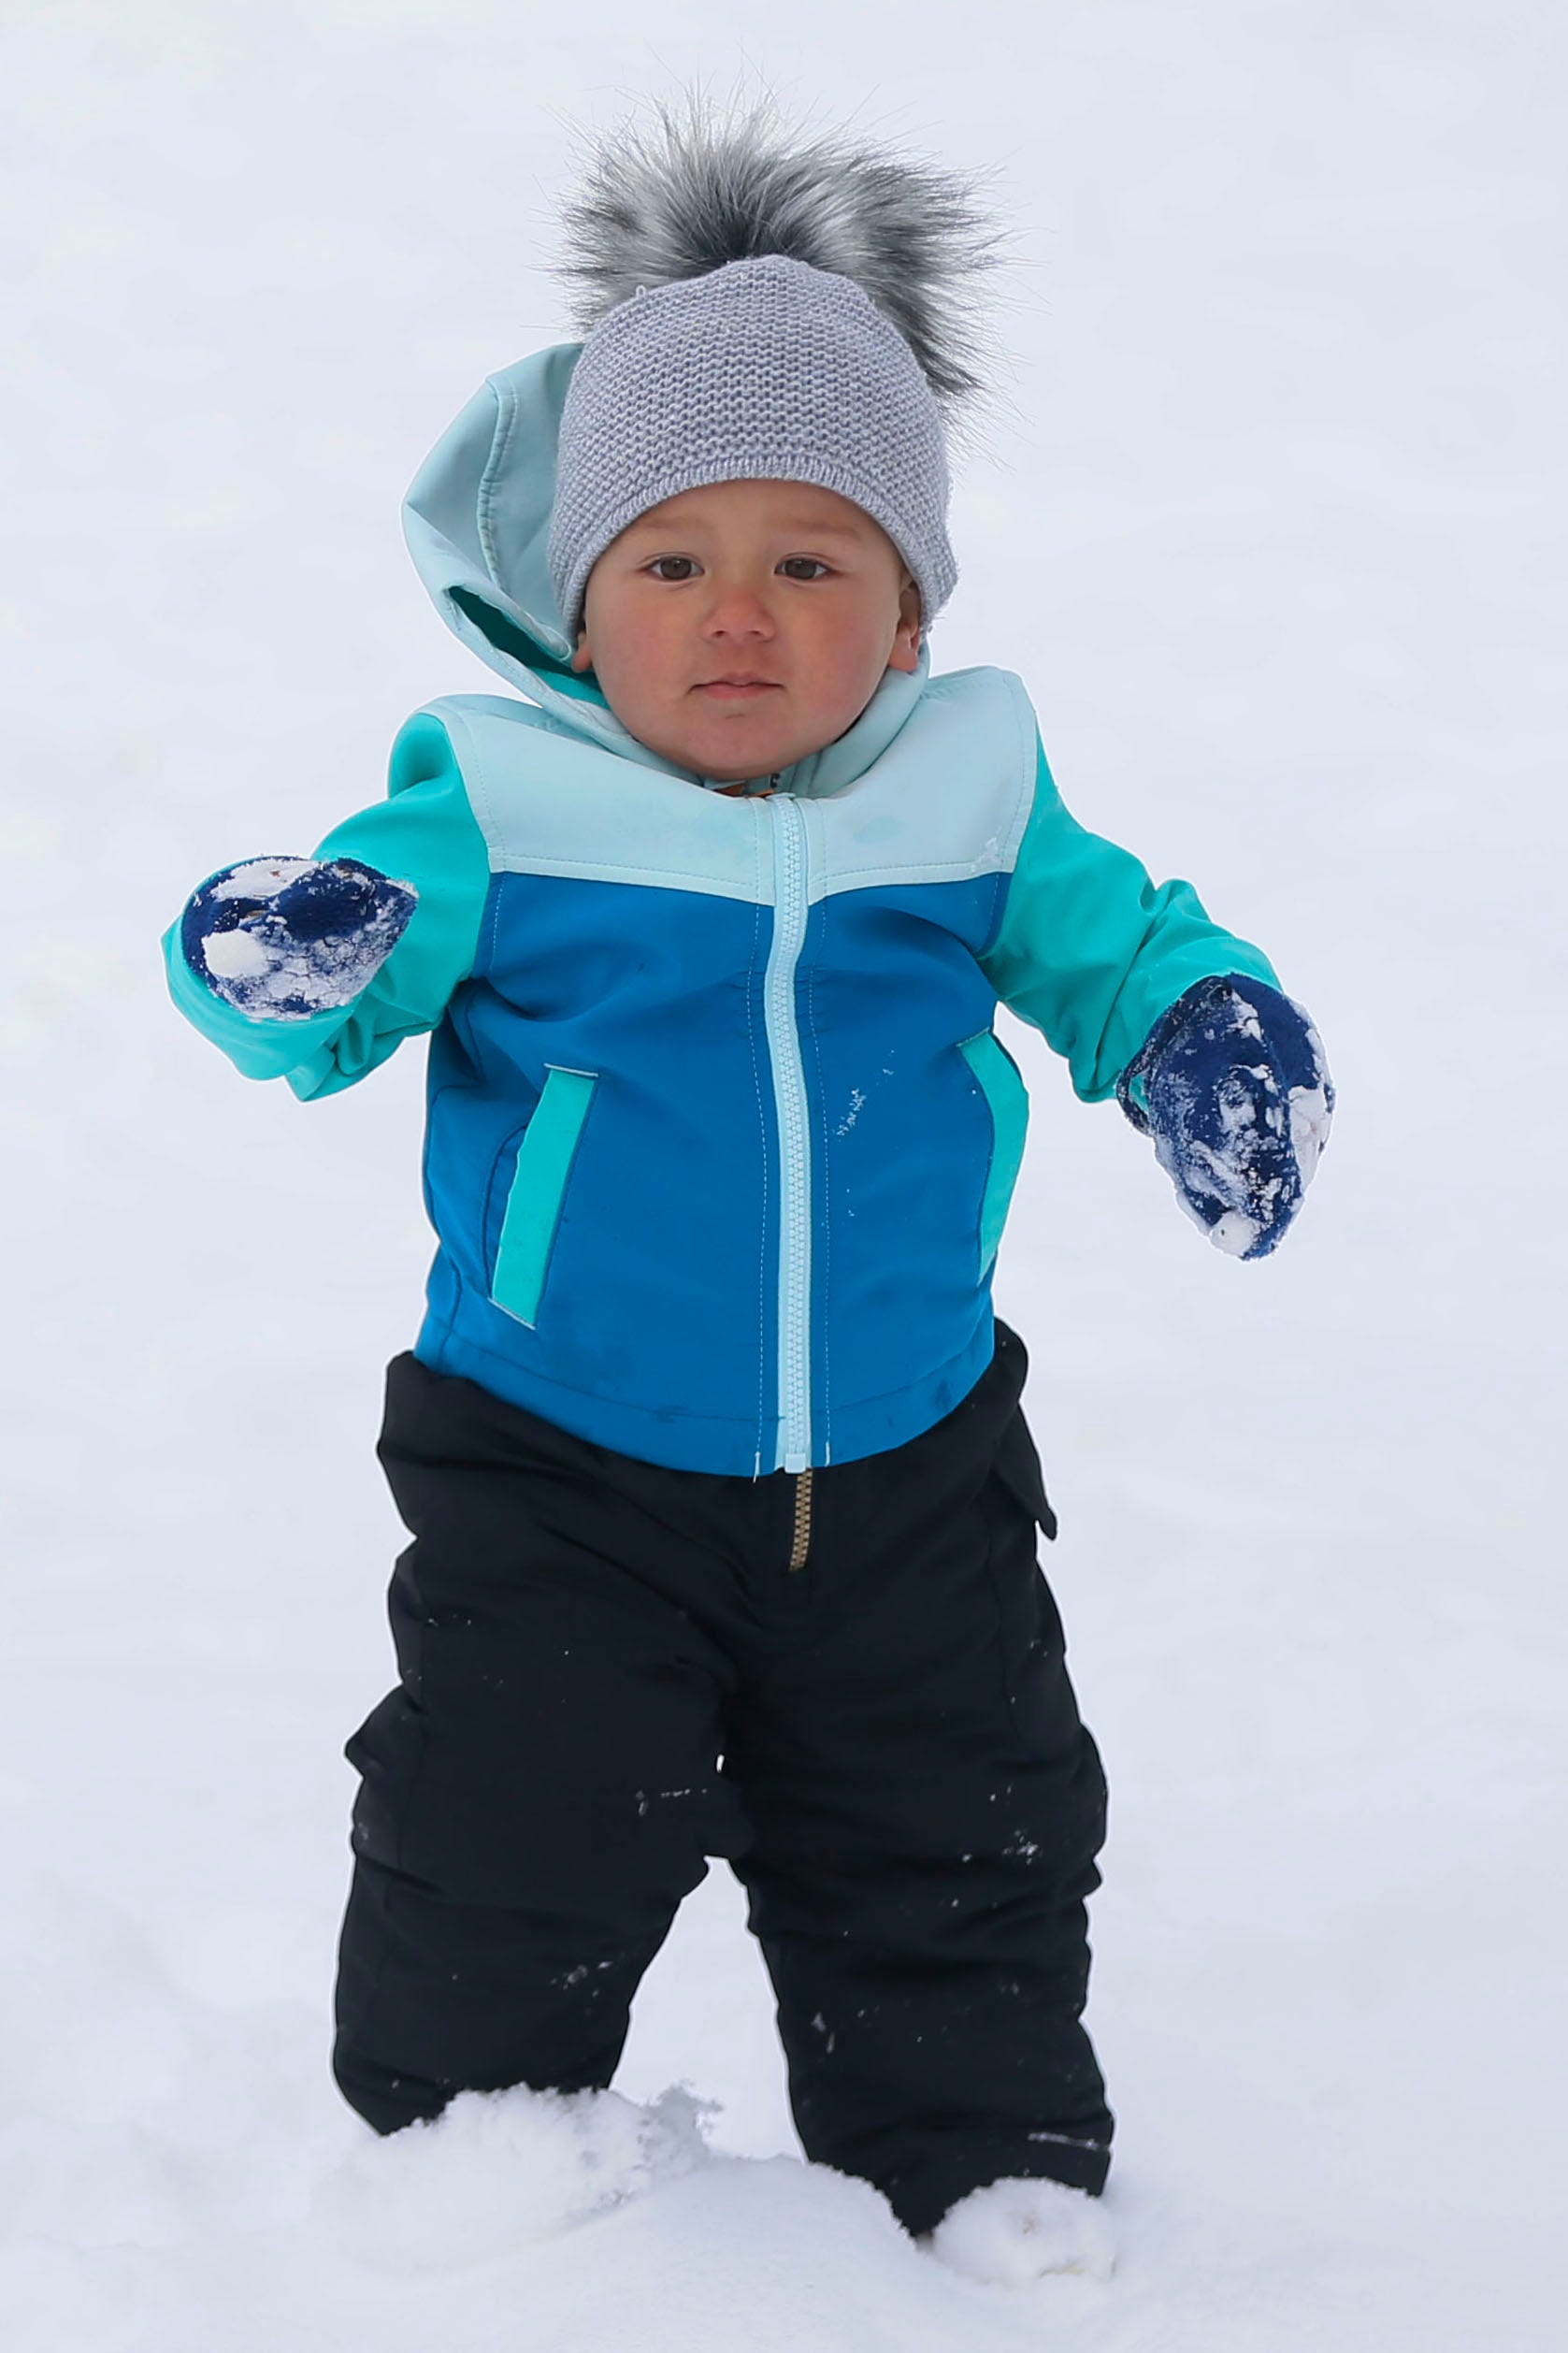 Matyas Selucky enjoys his first time in the snow on Valentine's Day, Sunday, Feb. 14, 2021 at Memorial Park in El Paso.